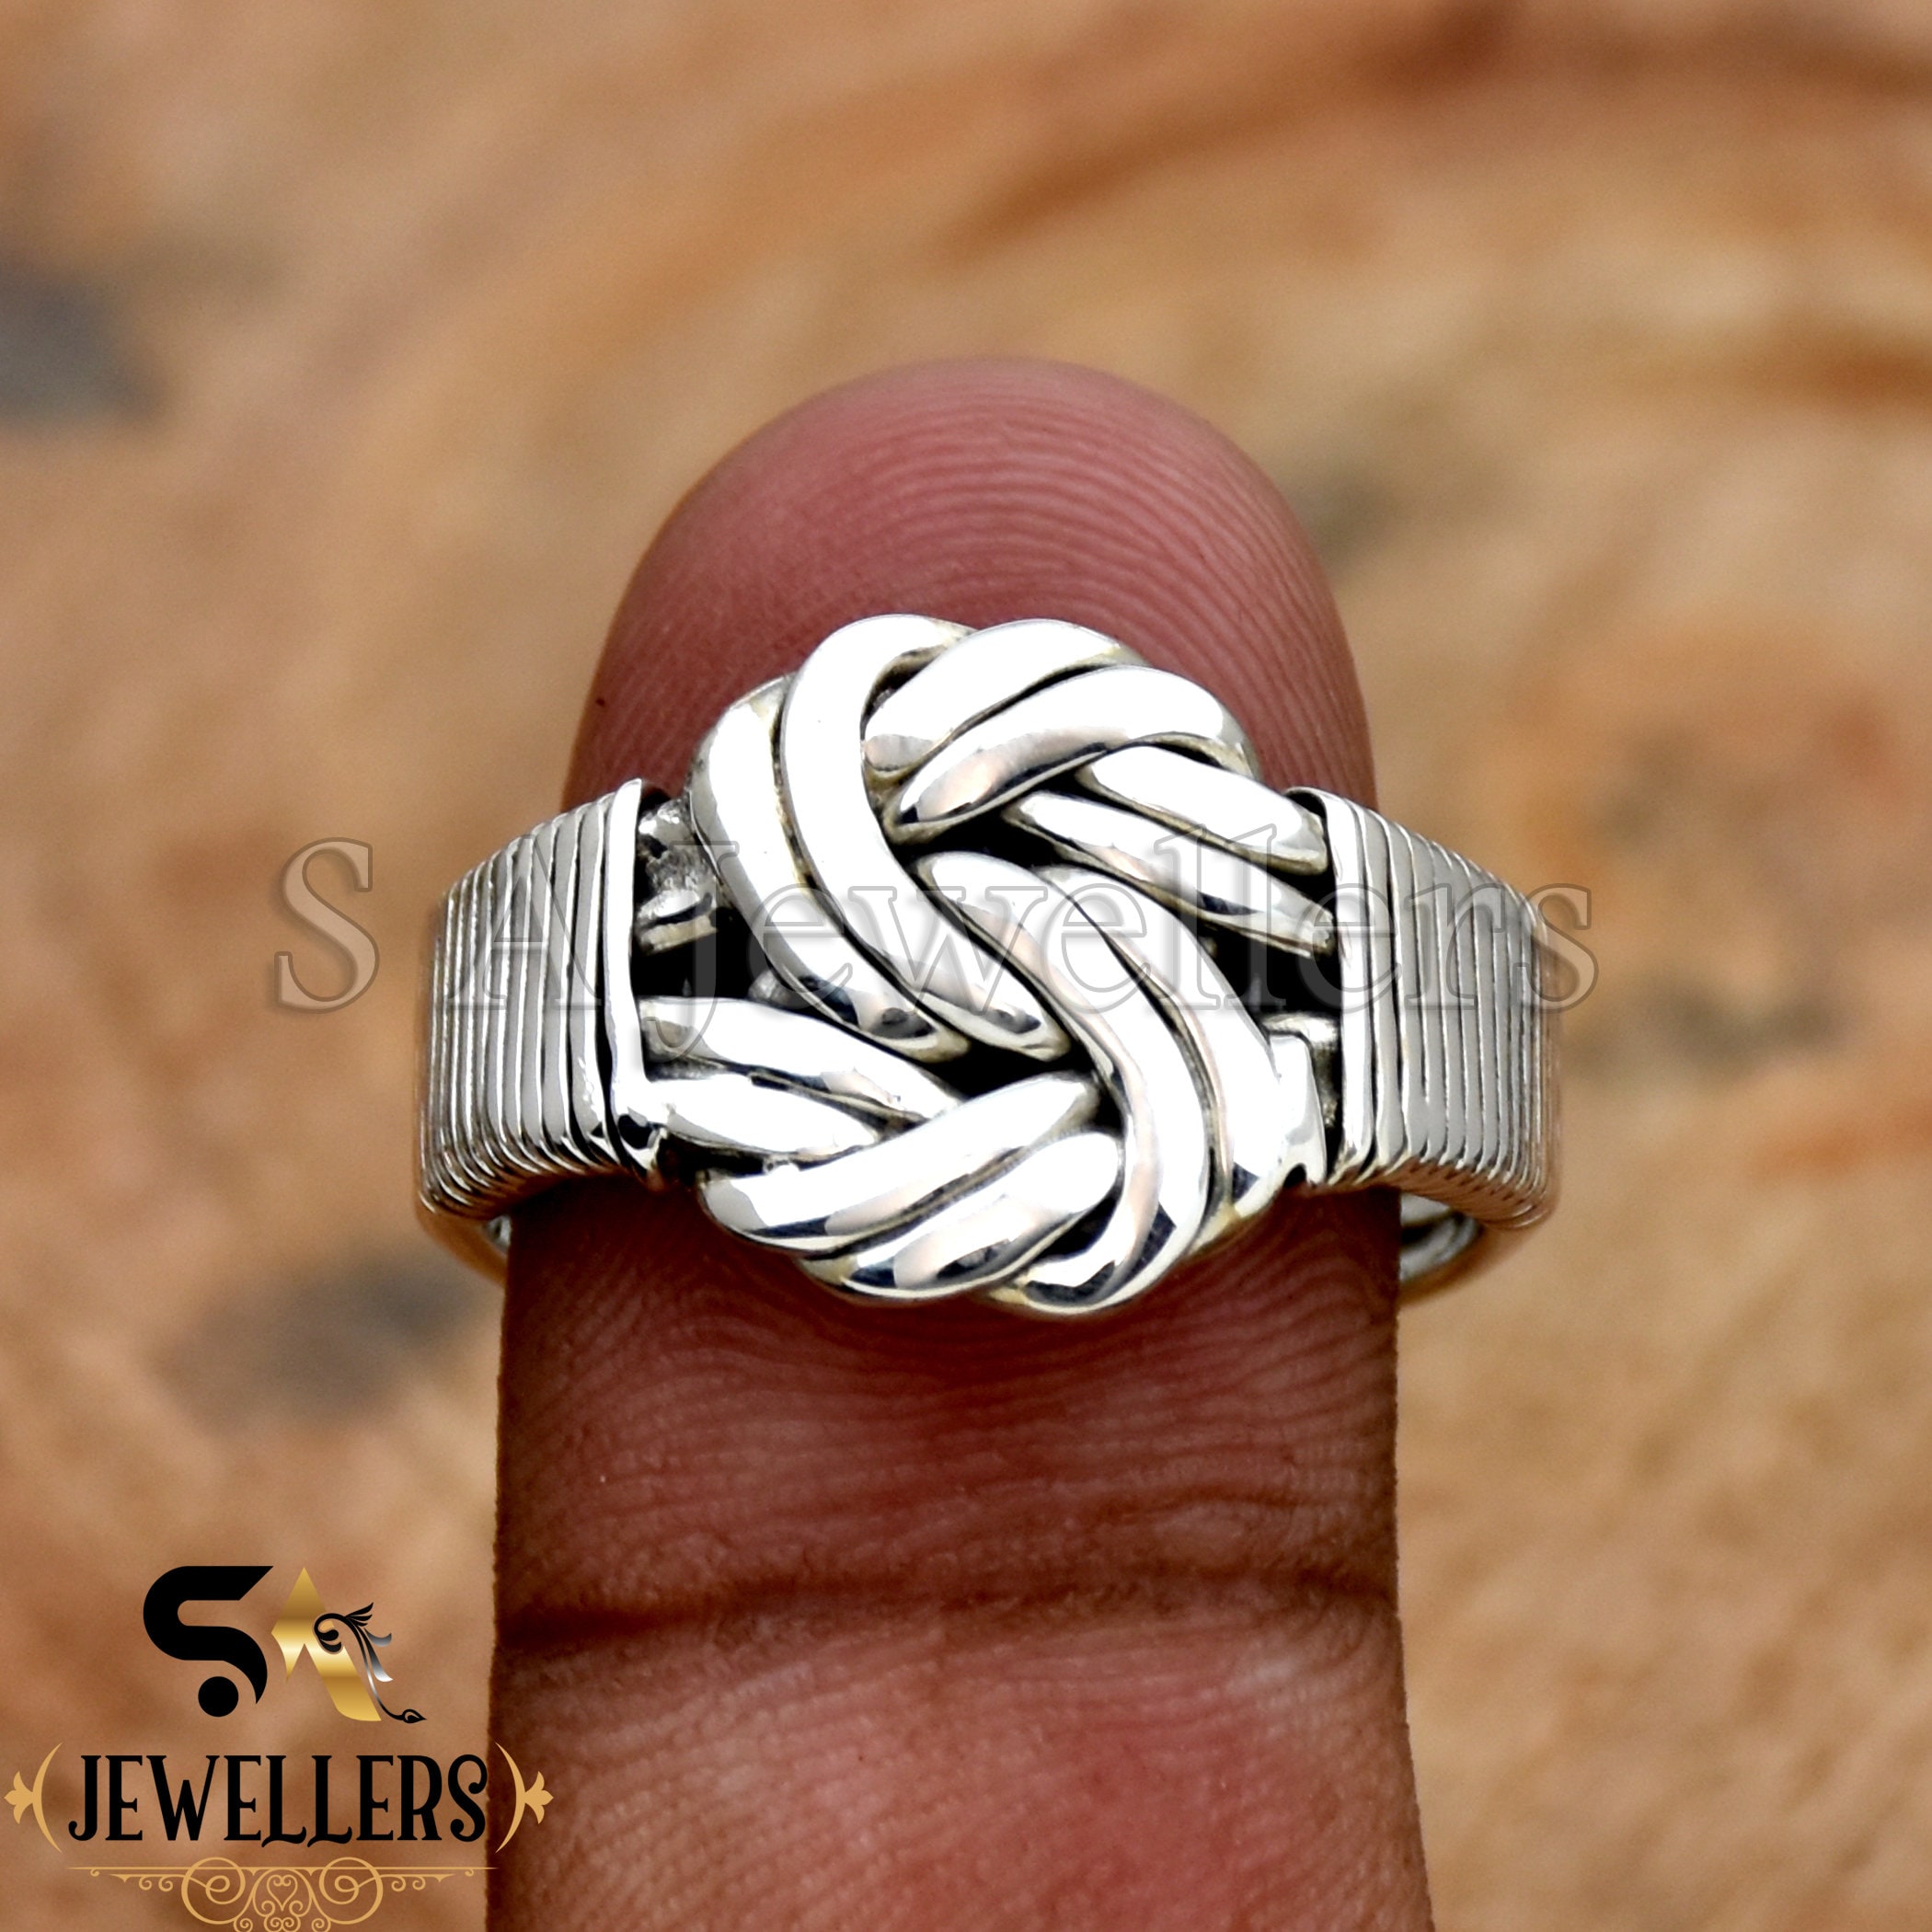 Celtic Knot Ring Wire Wrap Tutorial DIY PDF Book Lesson How to